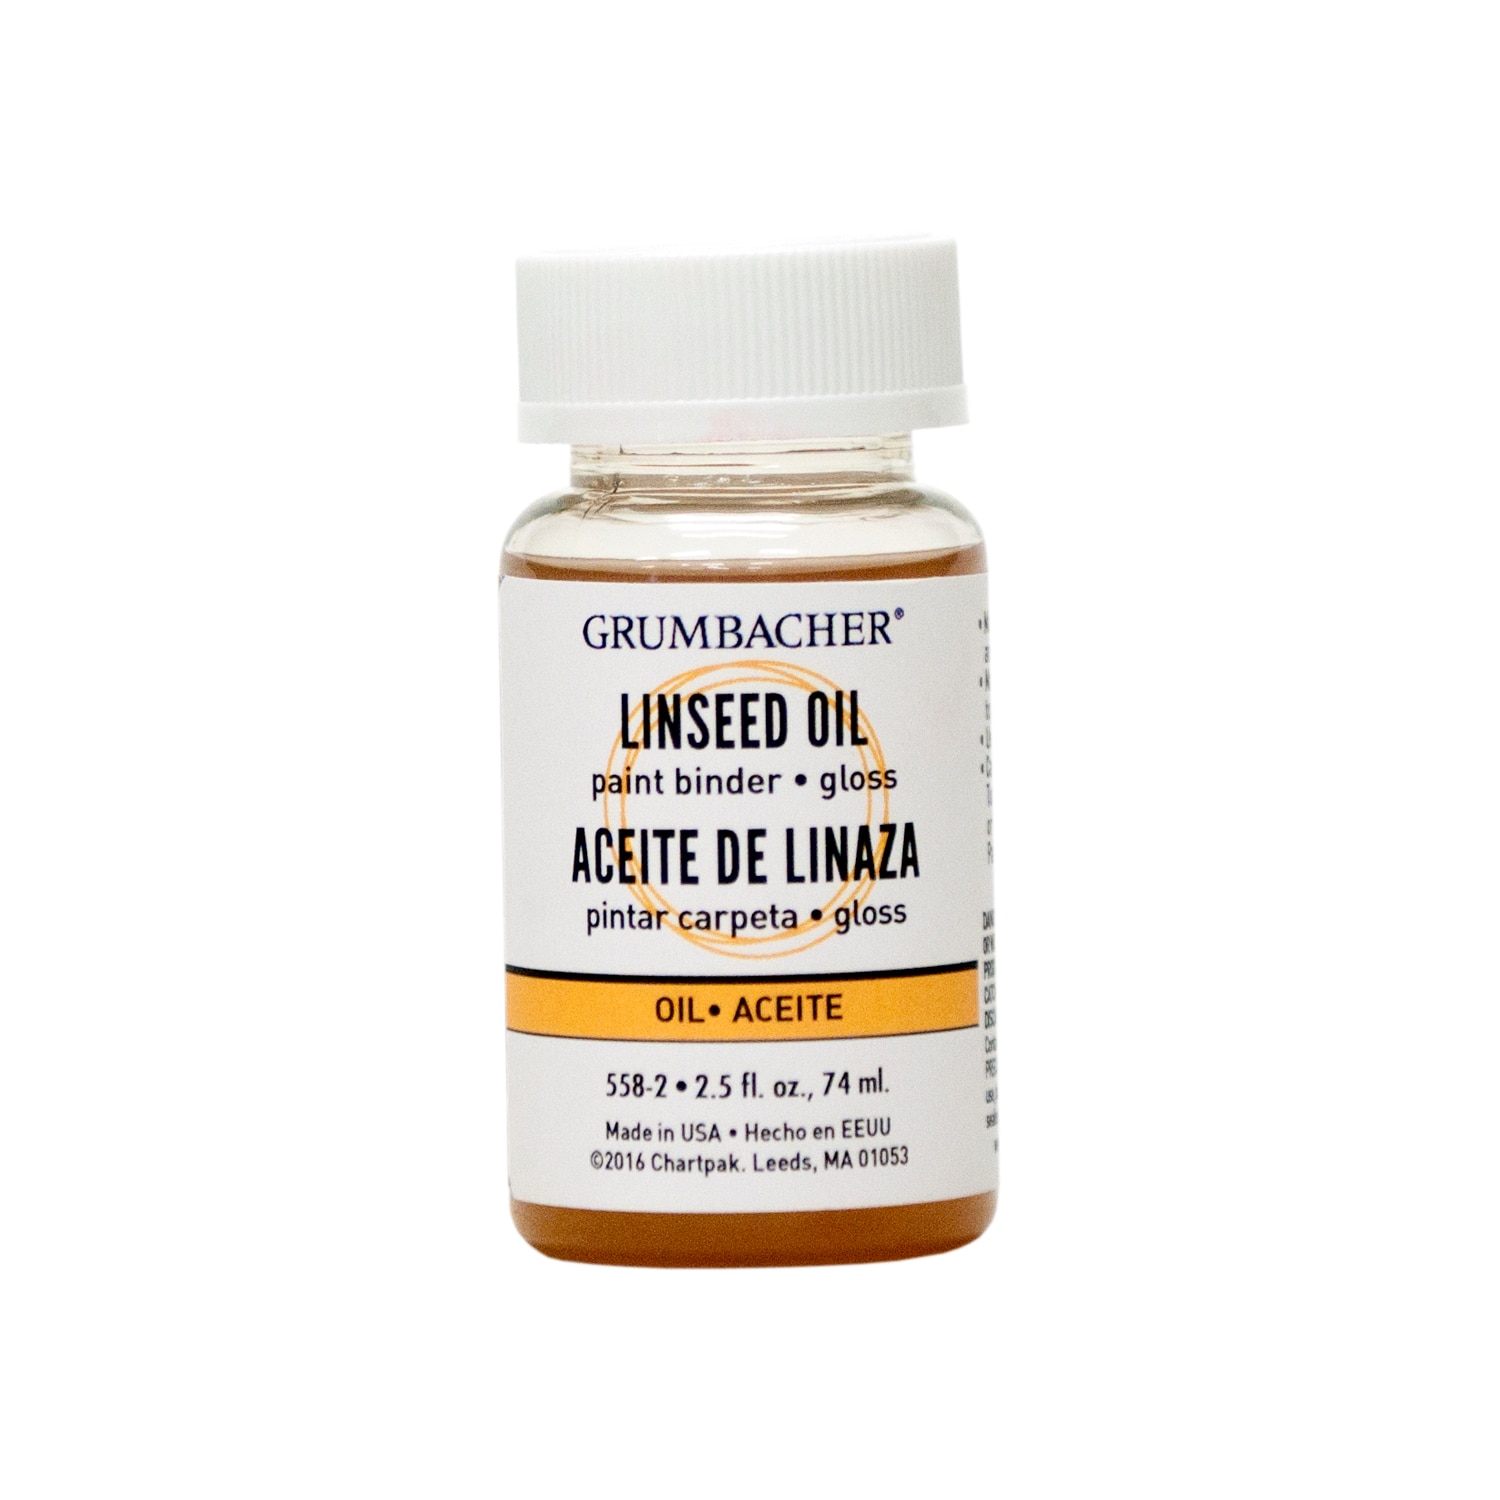 Grumbacher Linseed Oil, 2 oz.